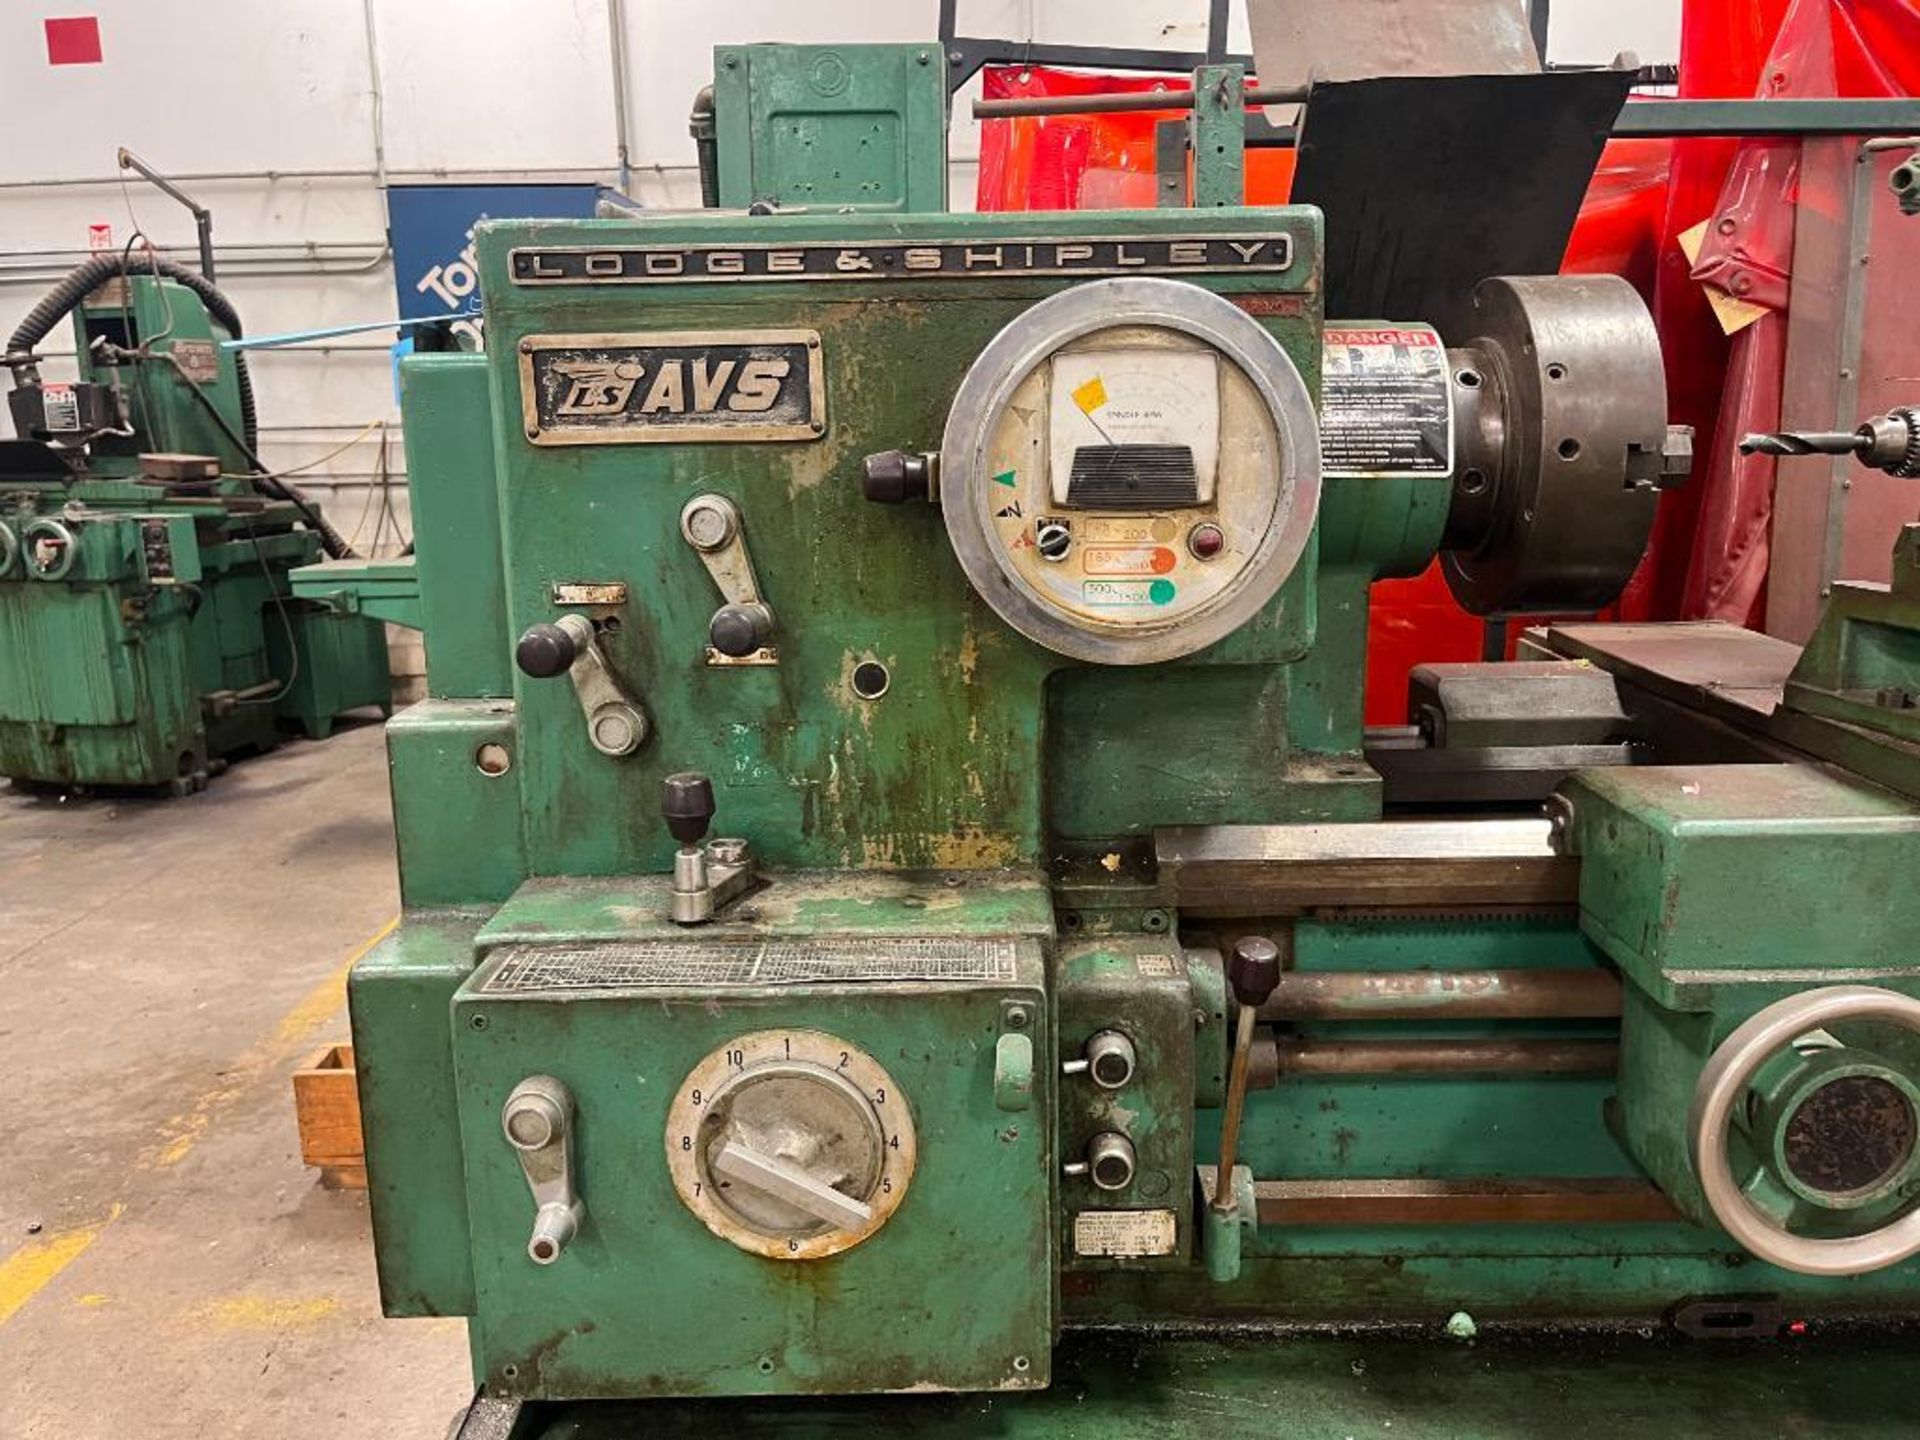 Lodge & Shipley AVS Engine Lathe, 24" x 72" with 12" 3 Jaw Chuck, Tailstock Steady Rest, Model 2010/ - Image 2 of 12